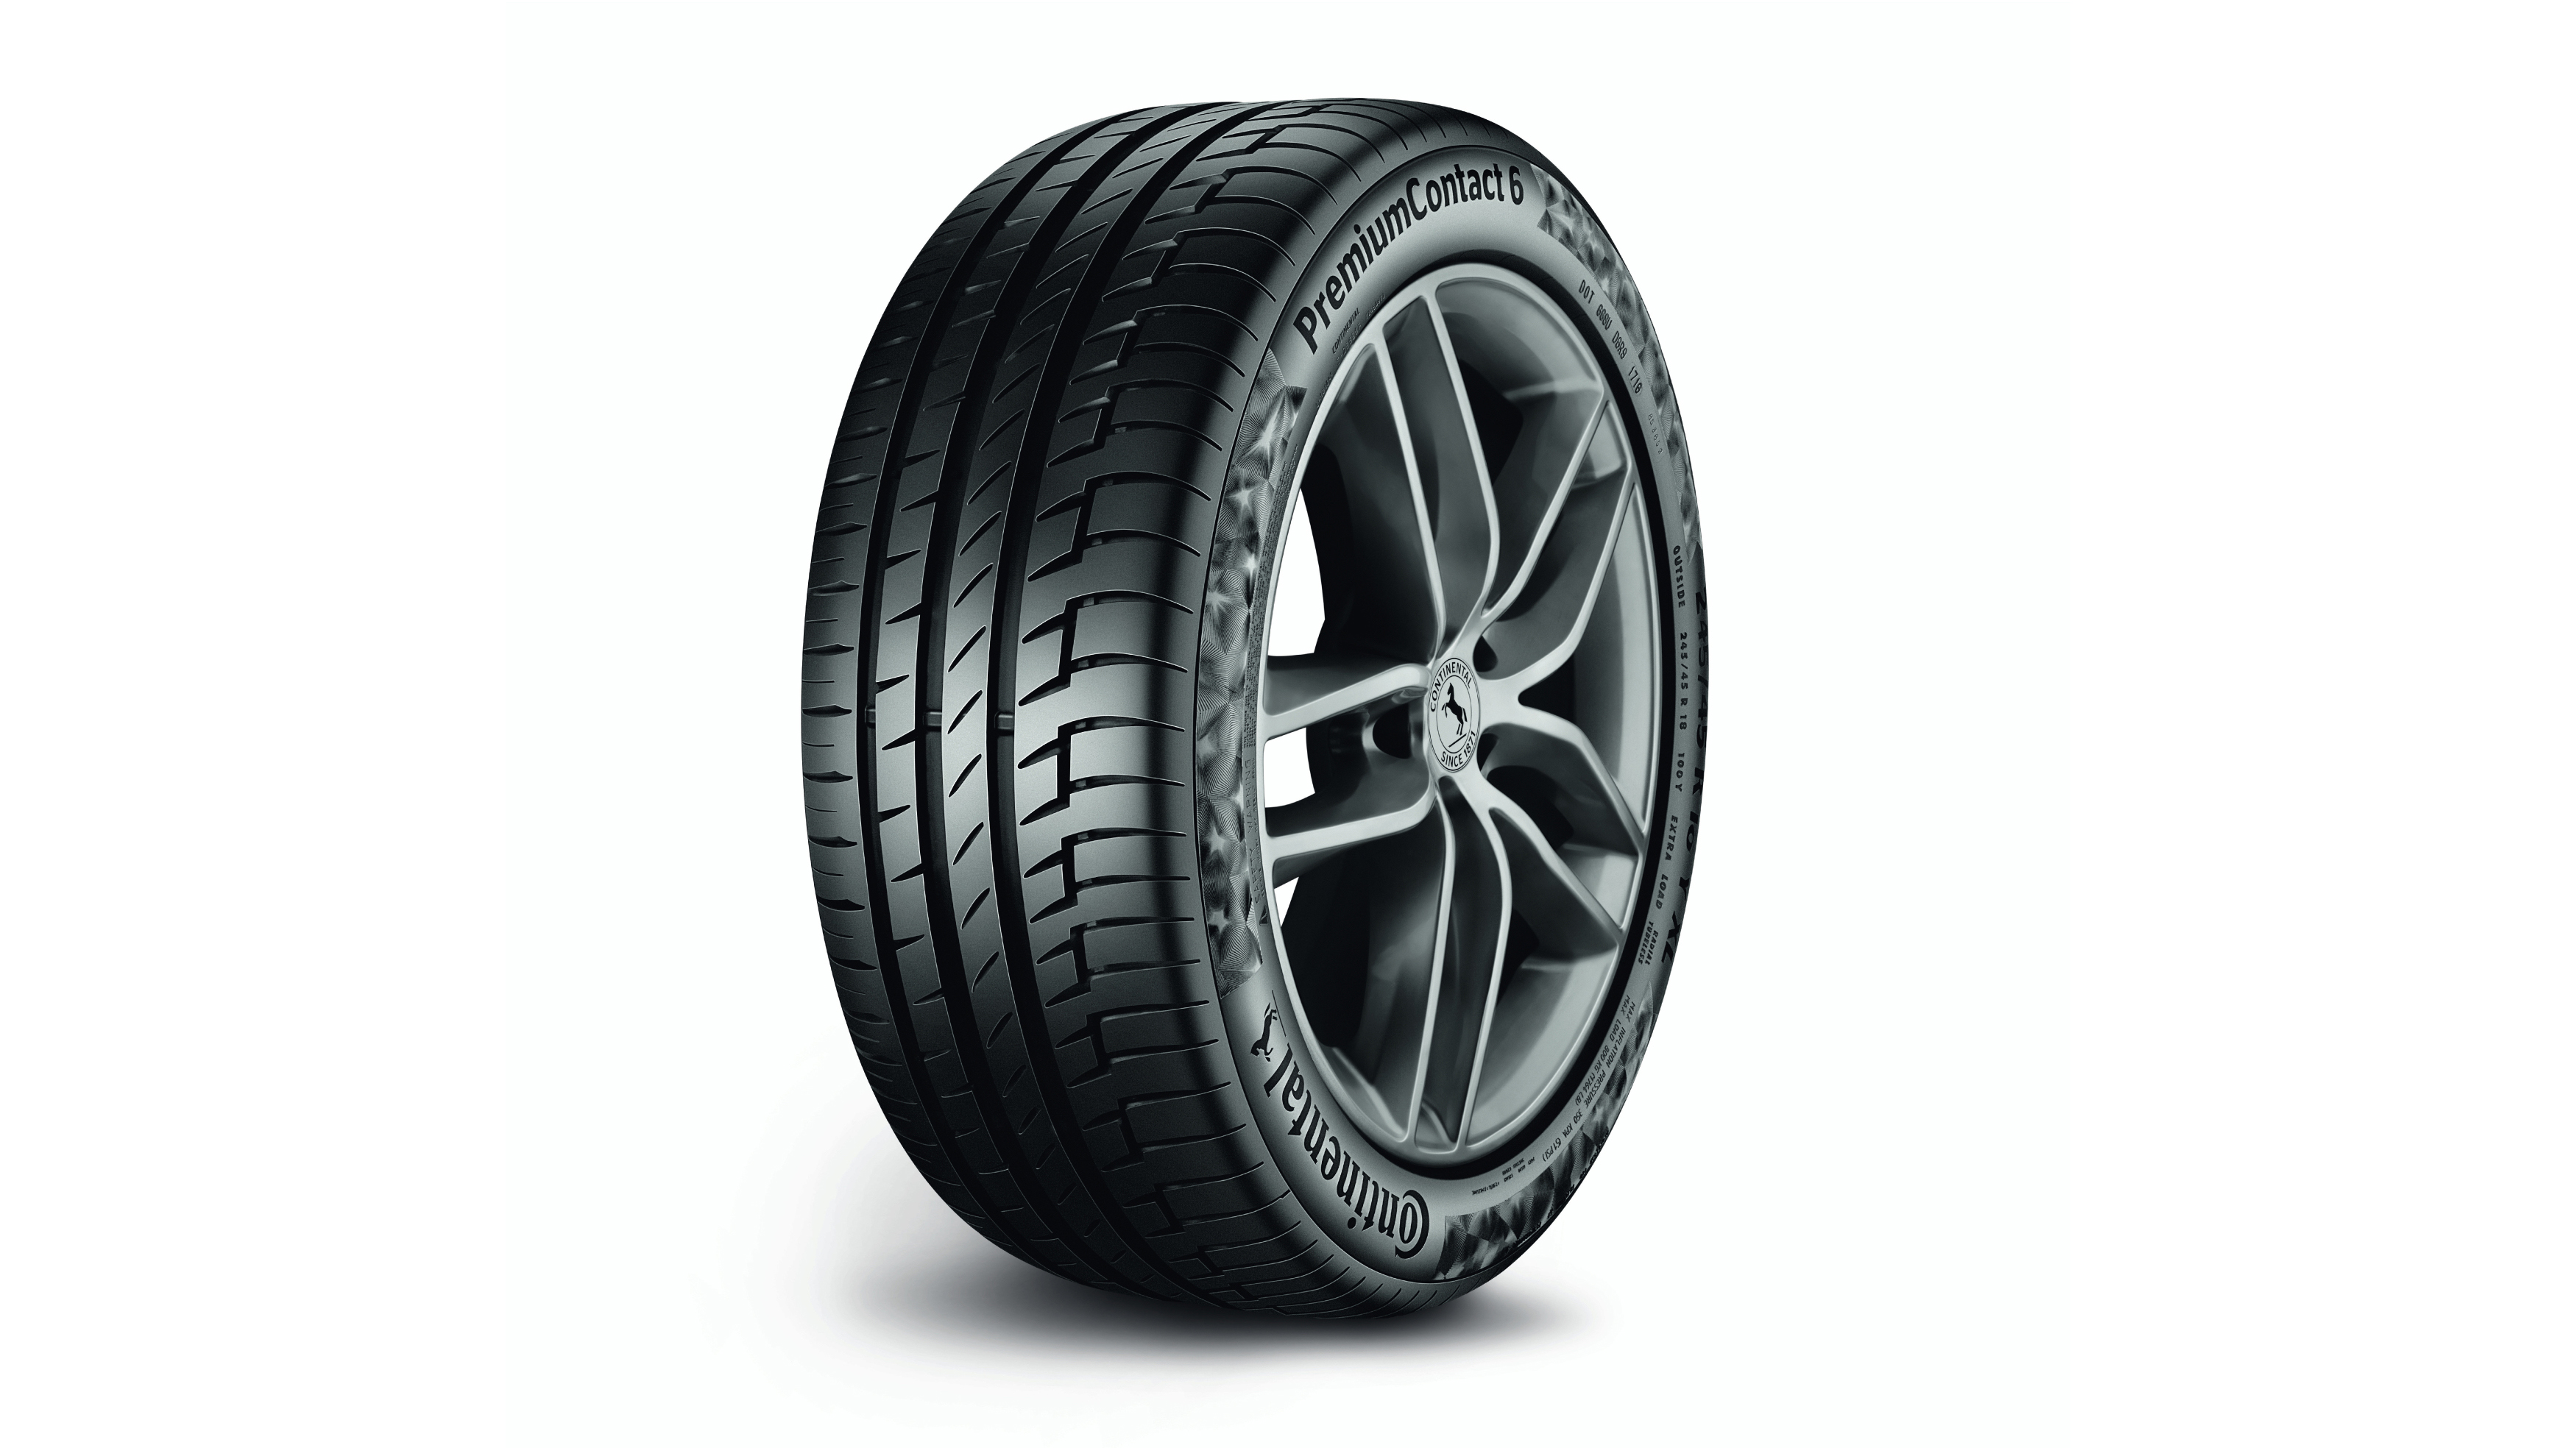 New Kia Niro Tires Continental with Comes Factory-Fitted - from AG Premium Continental